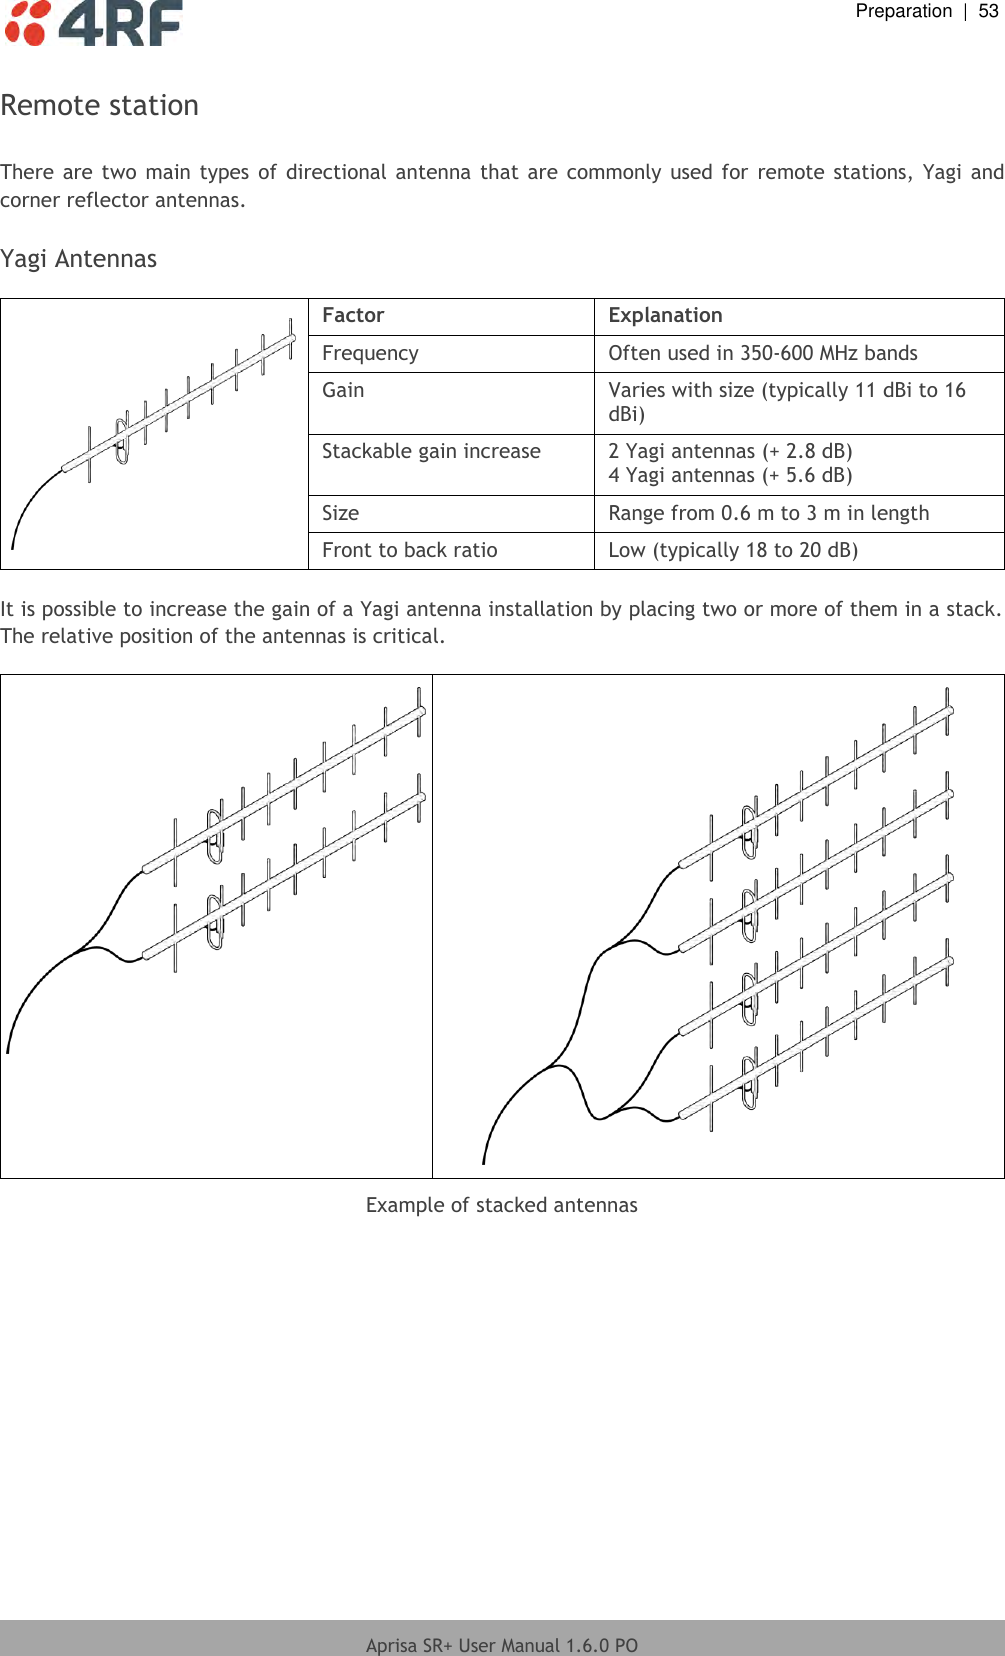  Preparation  |  53  Aprisa SR+ User Manual 1.6.0 PO  Remote station  There are two main types  of directional antenna  that are  commonly used for  remote stations, Yagi  and corner reflector antennas.  Yagi Antennas   Factor Explanation Frequency Often used in 350-600 MHz bands Gain Varies with size (typically 11 dBi to 16 dBi) Stackable gain increase 2 Yagi antennas (+ 2.8 dB) 4 Yagi antennas (+ 5.6 dB) Size Range from 0.6 m to 3 m in length Front to back ratio Low (typically 18 to 20 dB)  It is possible to increase the gain of a Yagi antenna installation by placing two or more of them in a stack. The relative position of the antennas is critical.    Example of stacked antennas  